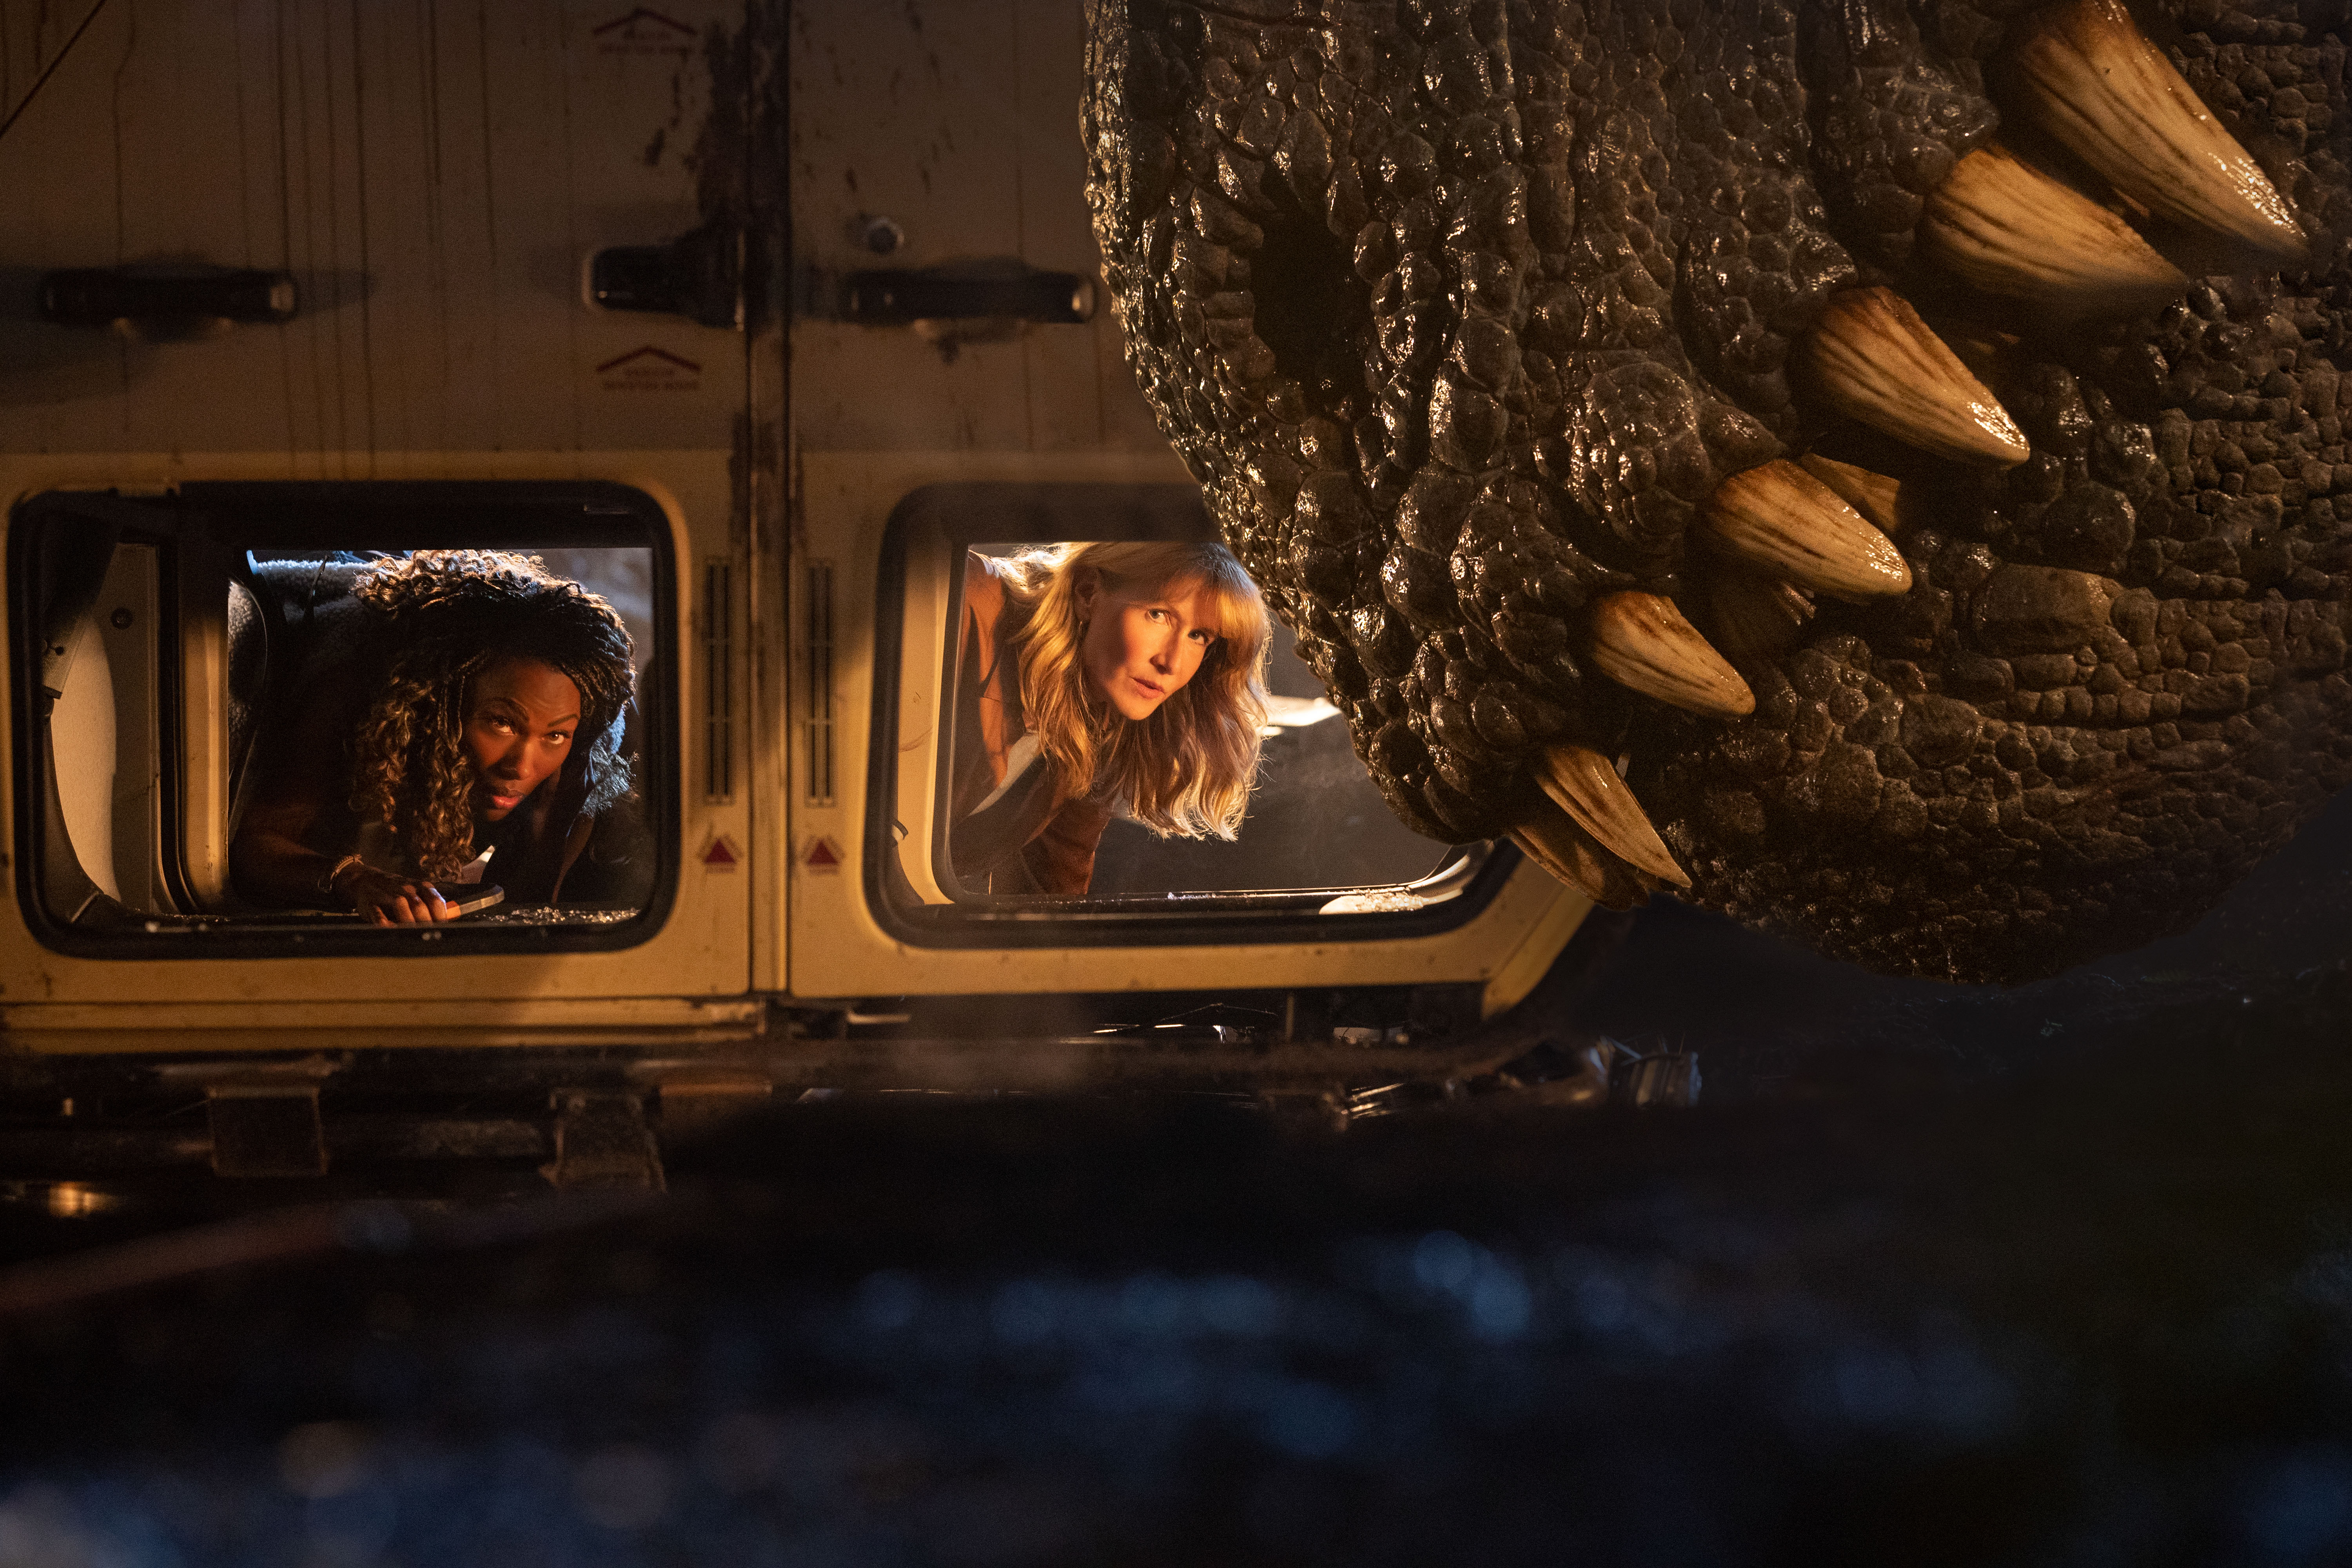 The snout of a large dinosaur is visible above the windows of a flipped-over car containing Laura Dern and DeWanda Wise.